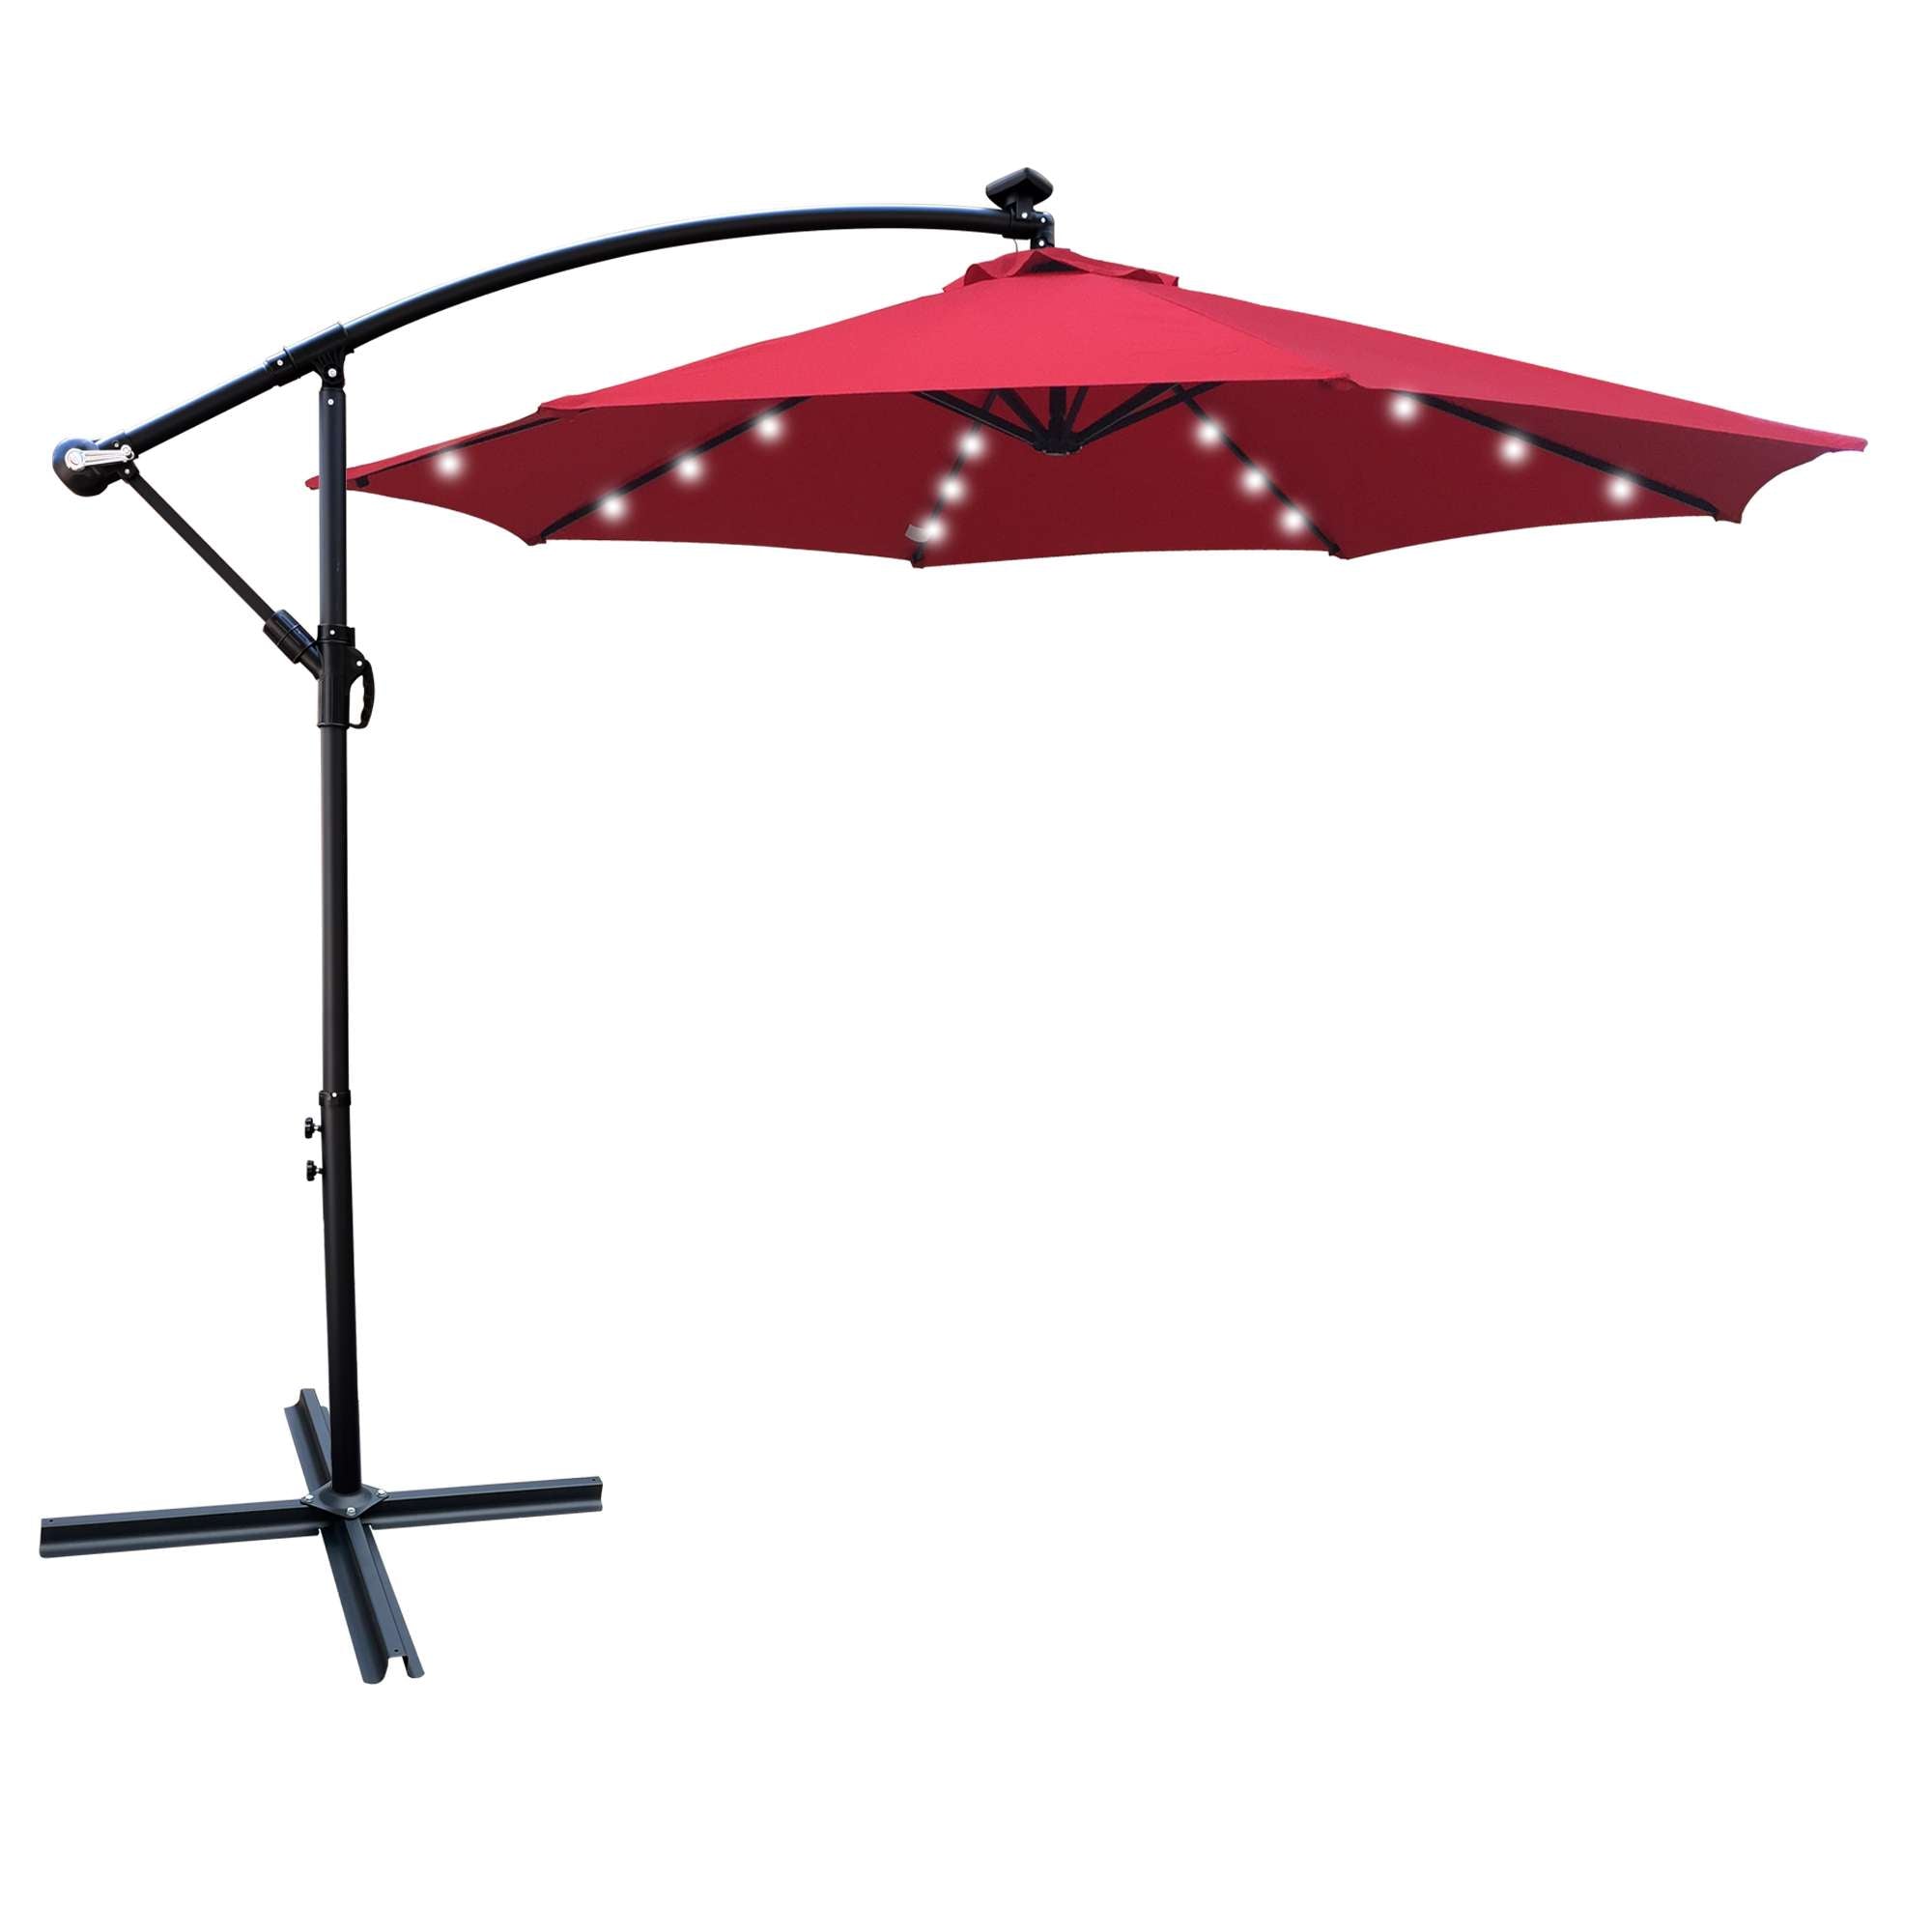 [KGORGE Plus] 10 ft Outdoor Patio Umbrella Solar Powered LED Lighted for Garden Backyard Pool